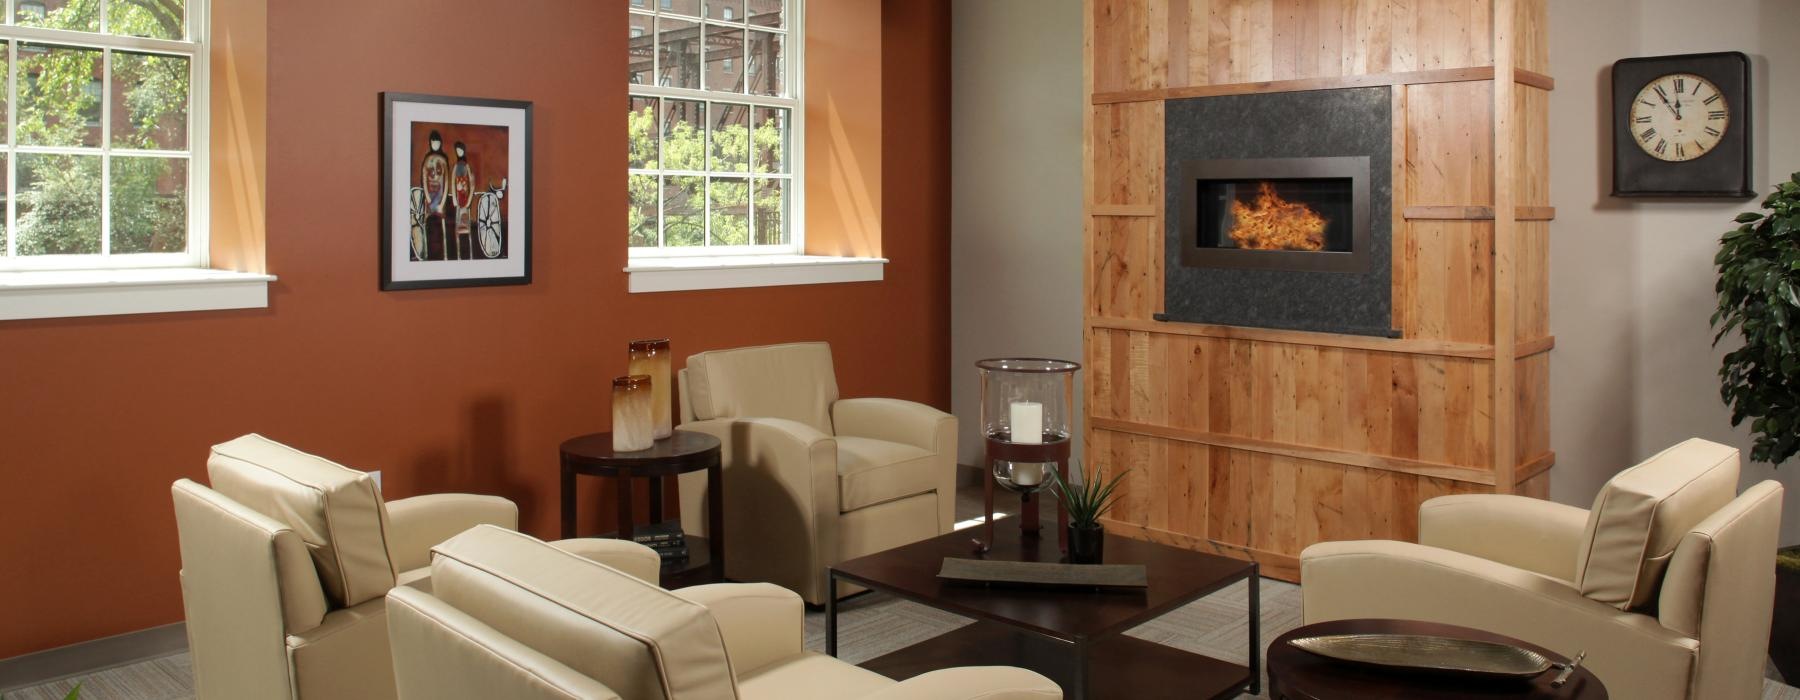 fireside seating in resident clubroom